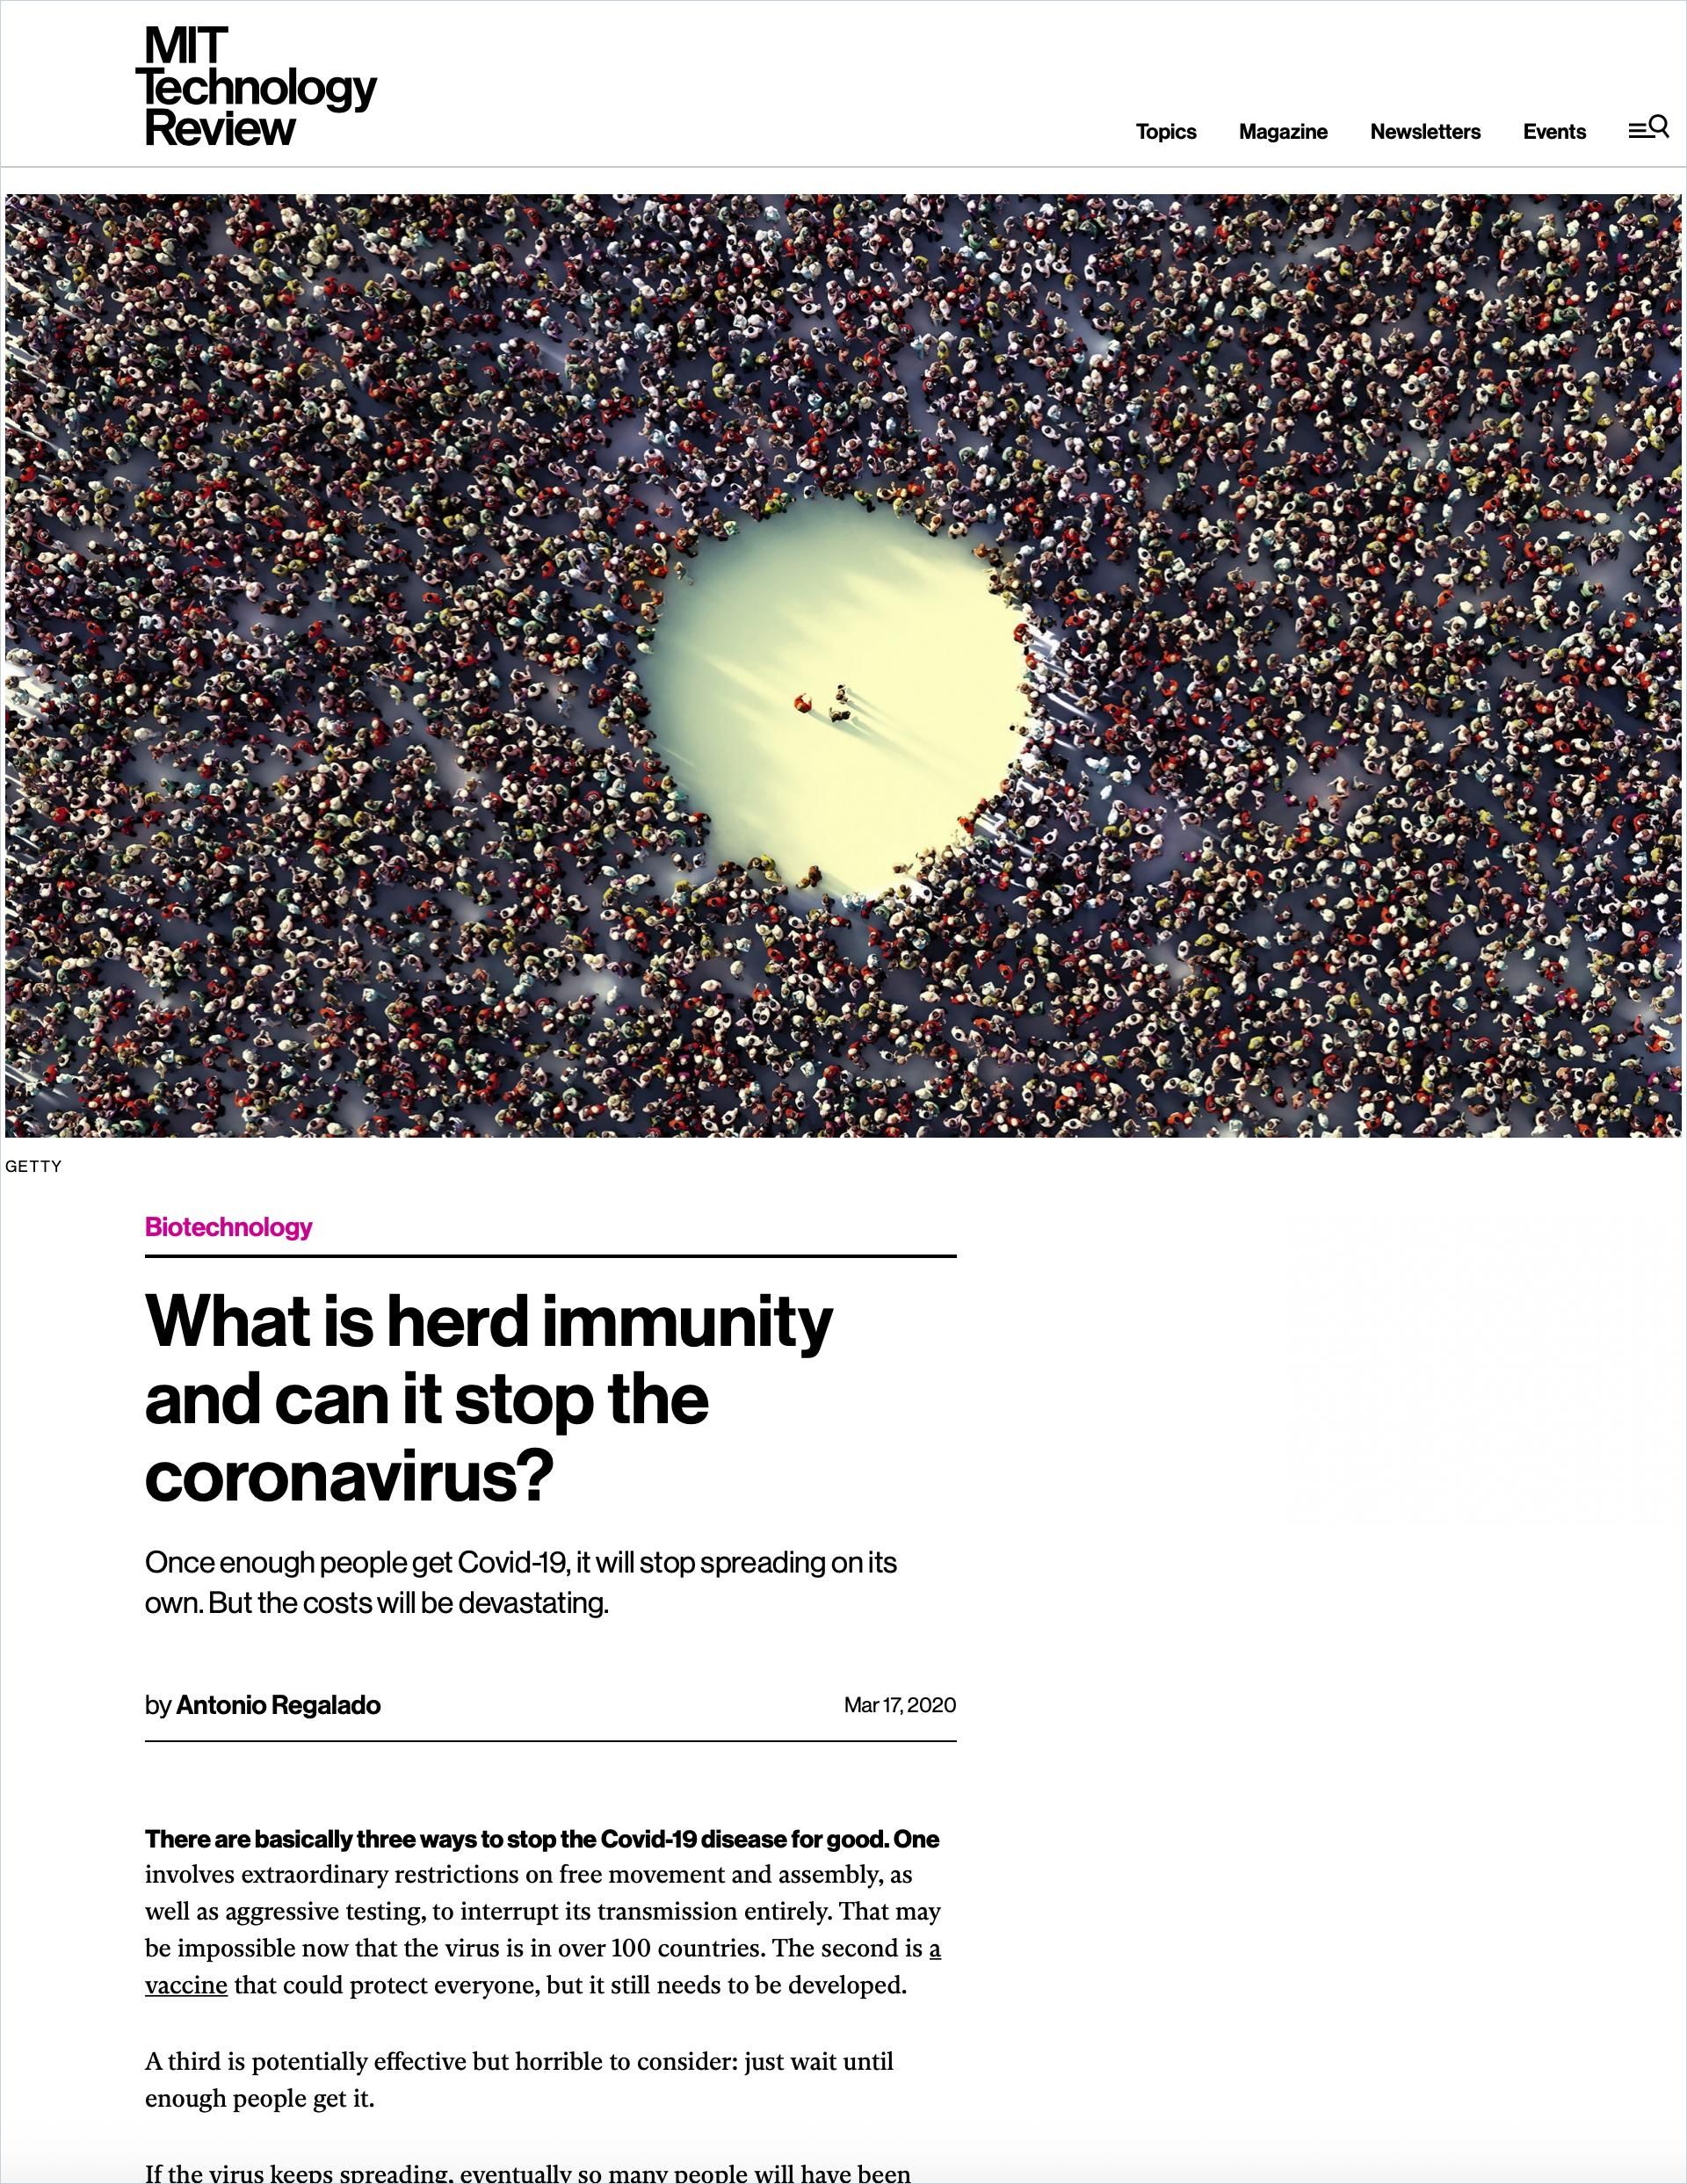 image of: what is herd immunity and can it stop the coronavirus?